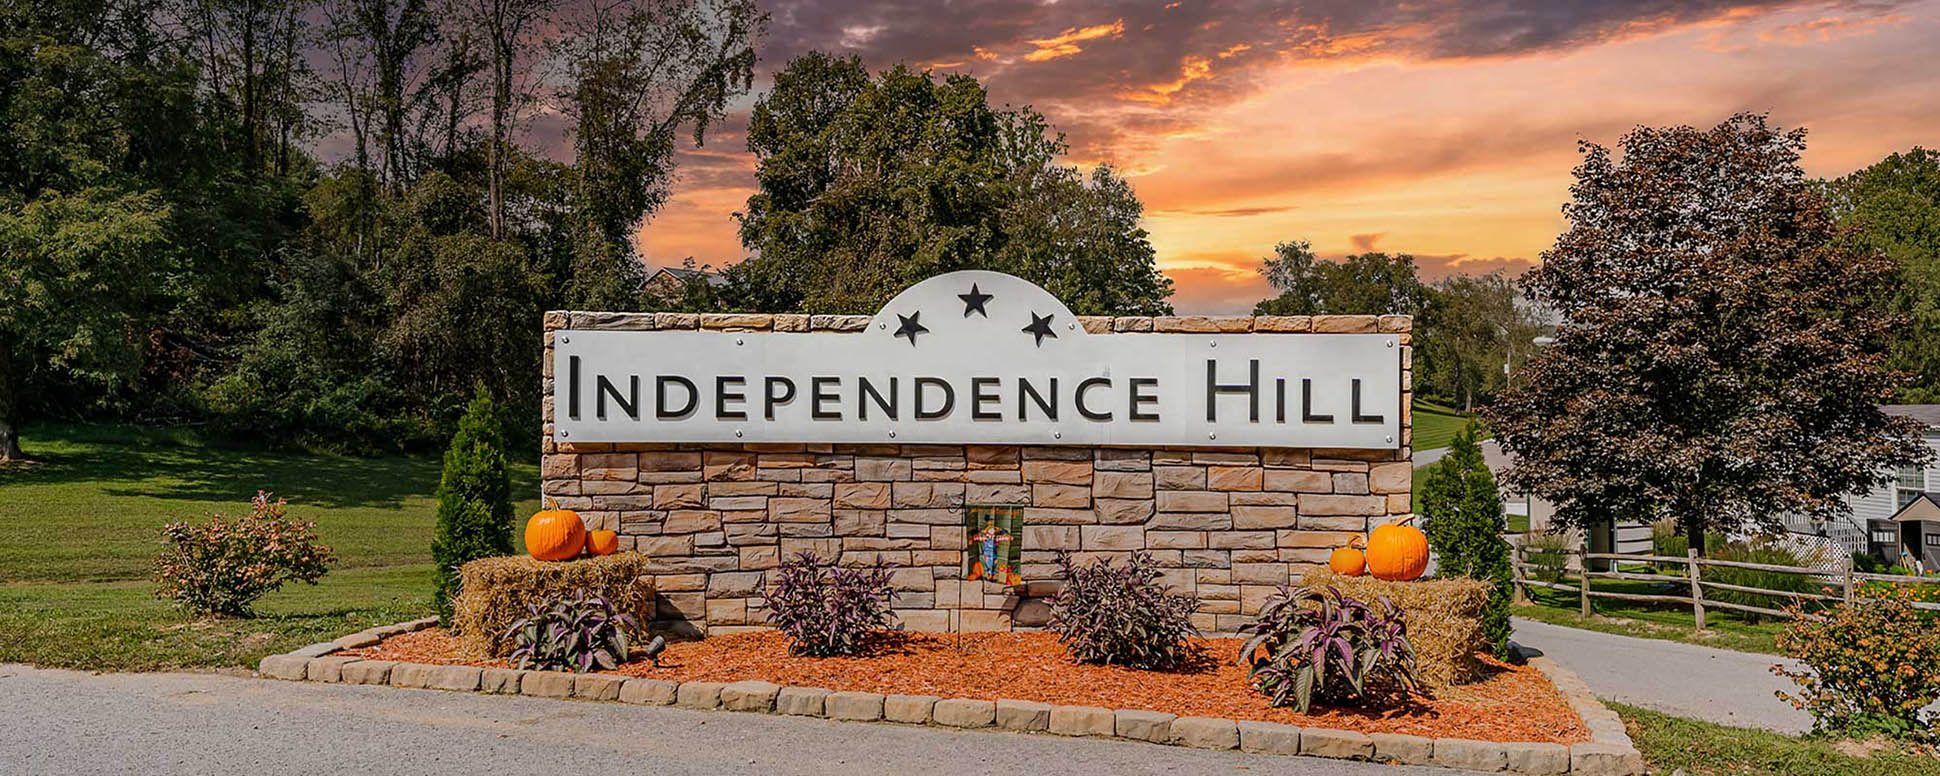 Independence Hill